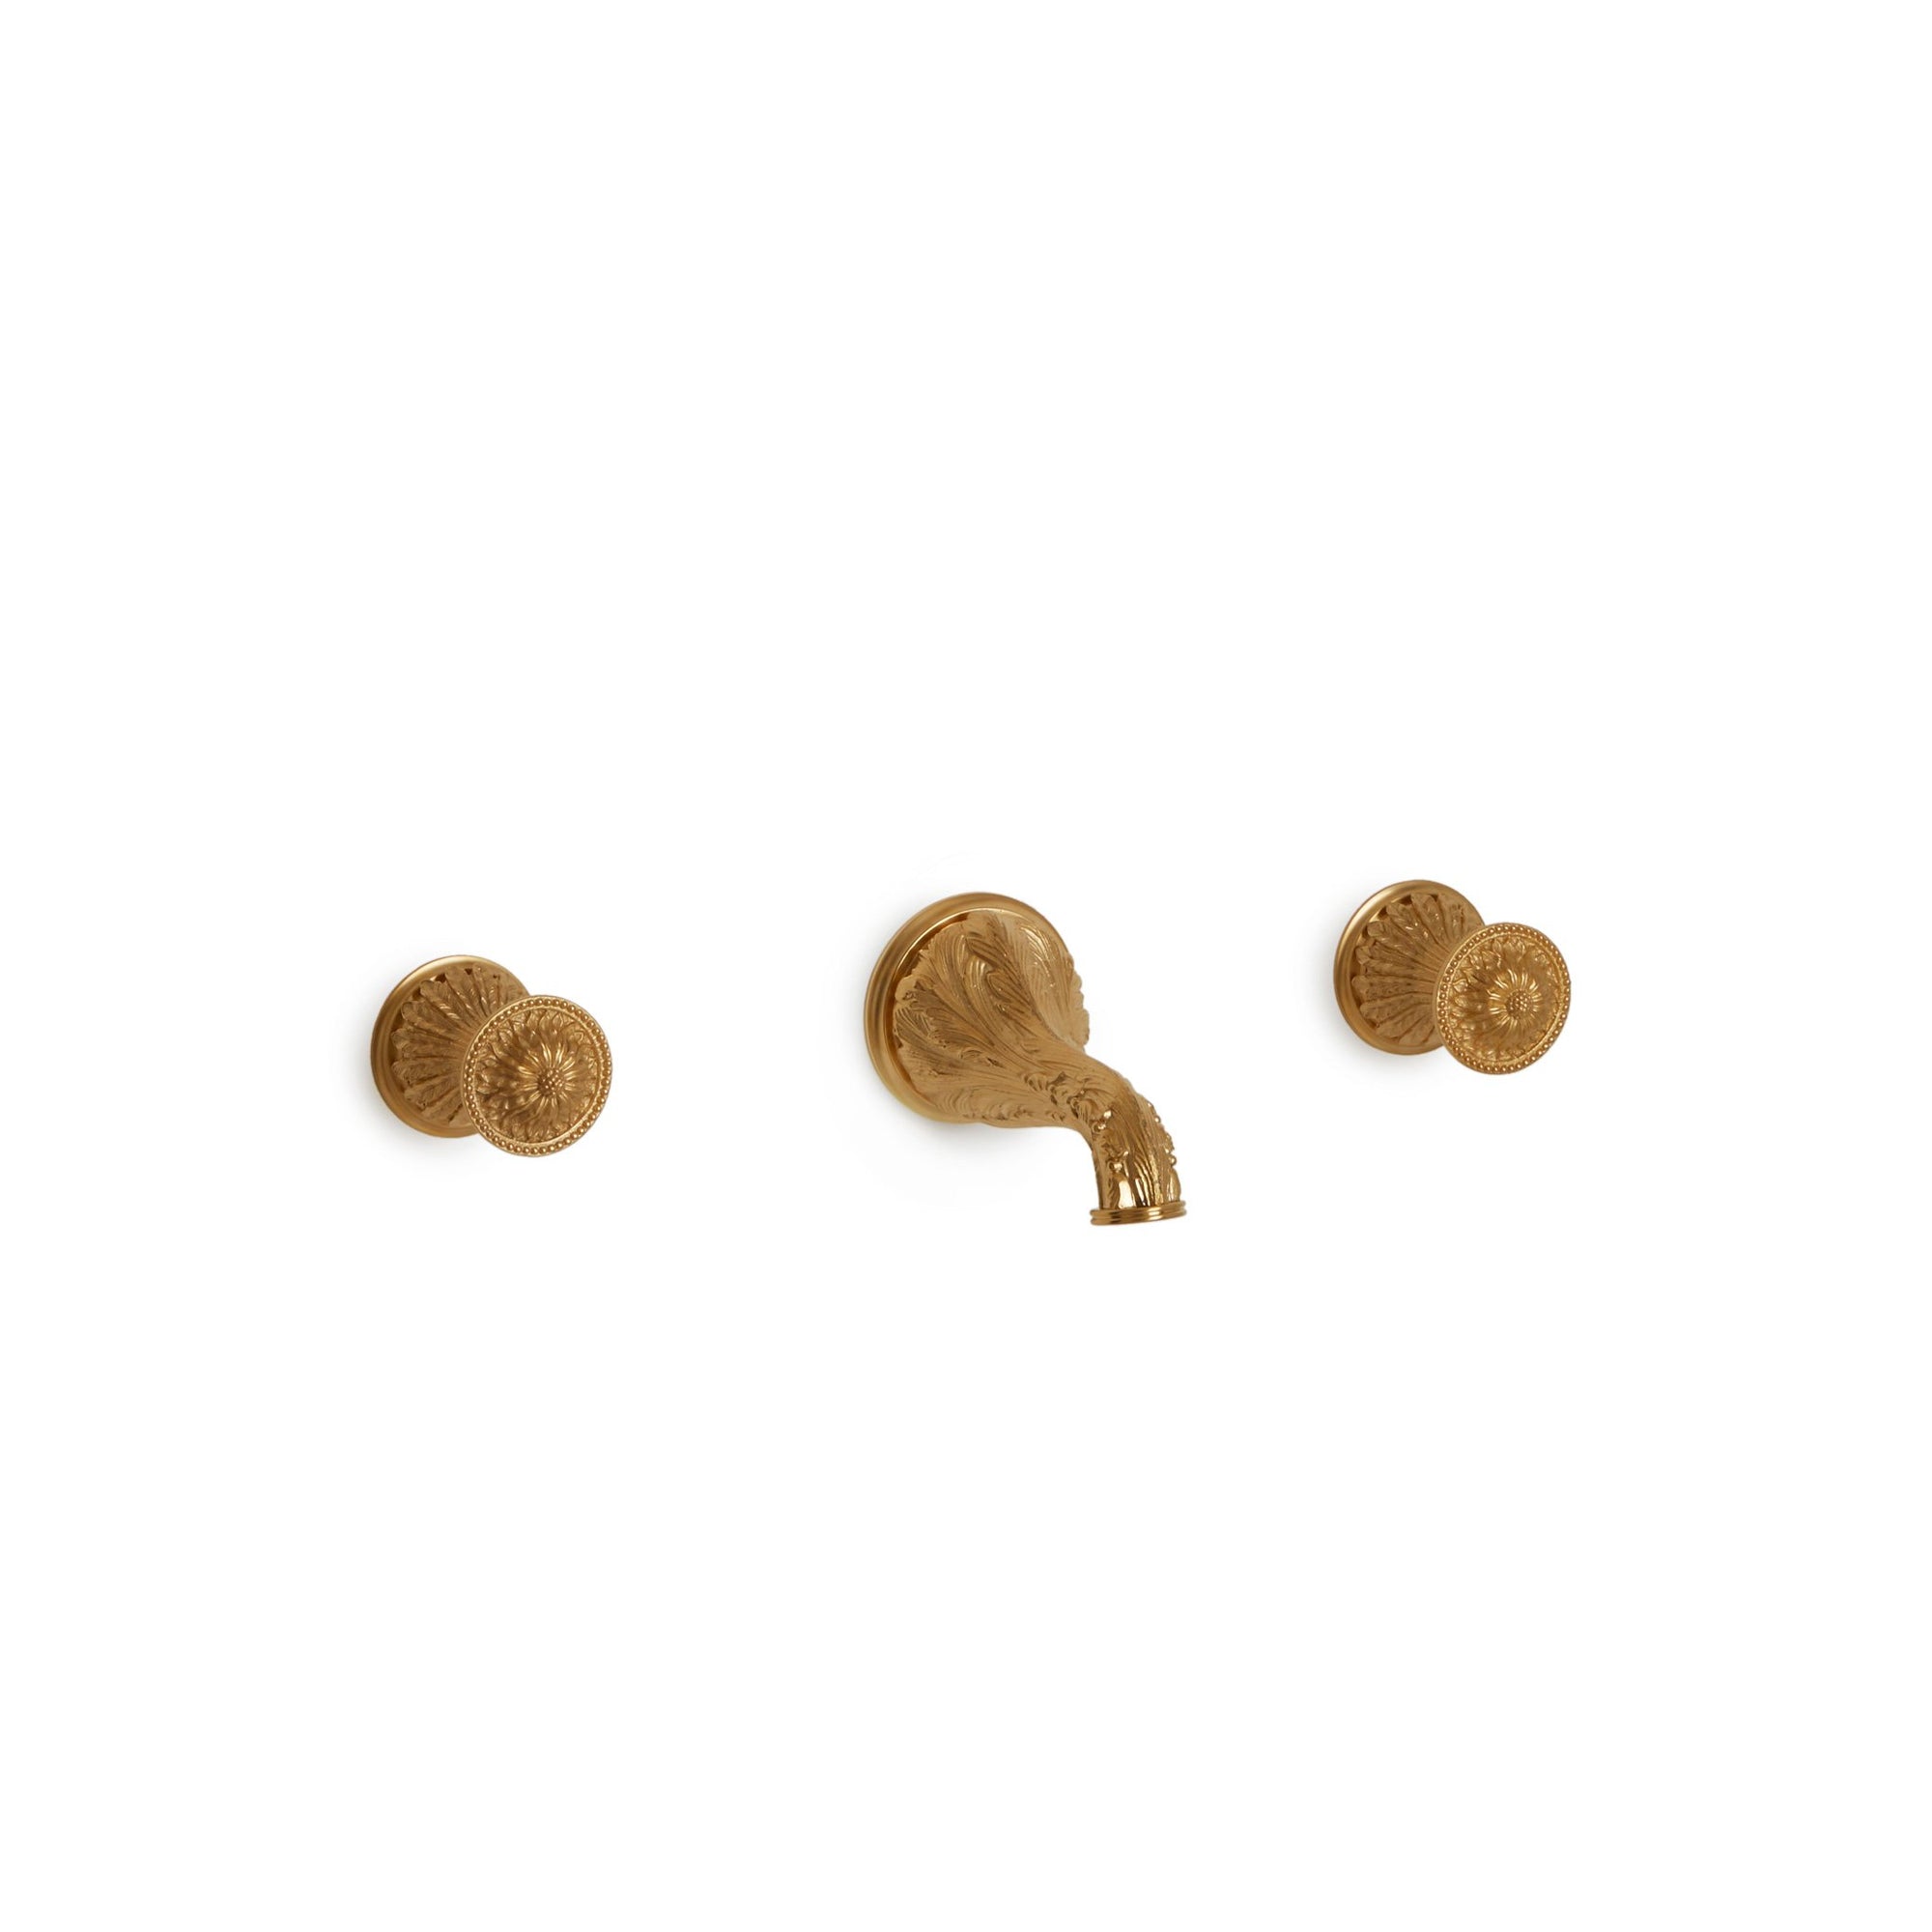 0918WBS819-GP Sherle Wagner International Acanthus Knob Wall Mount Faucet Set in Gold Plate metal finish